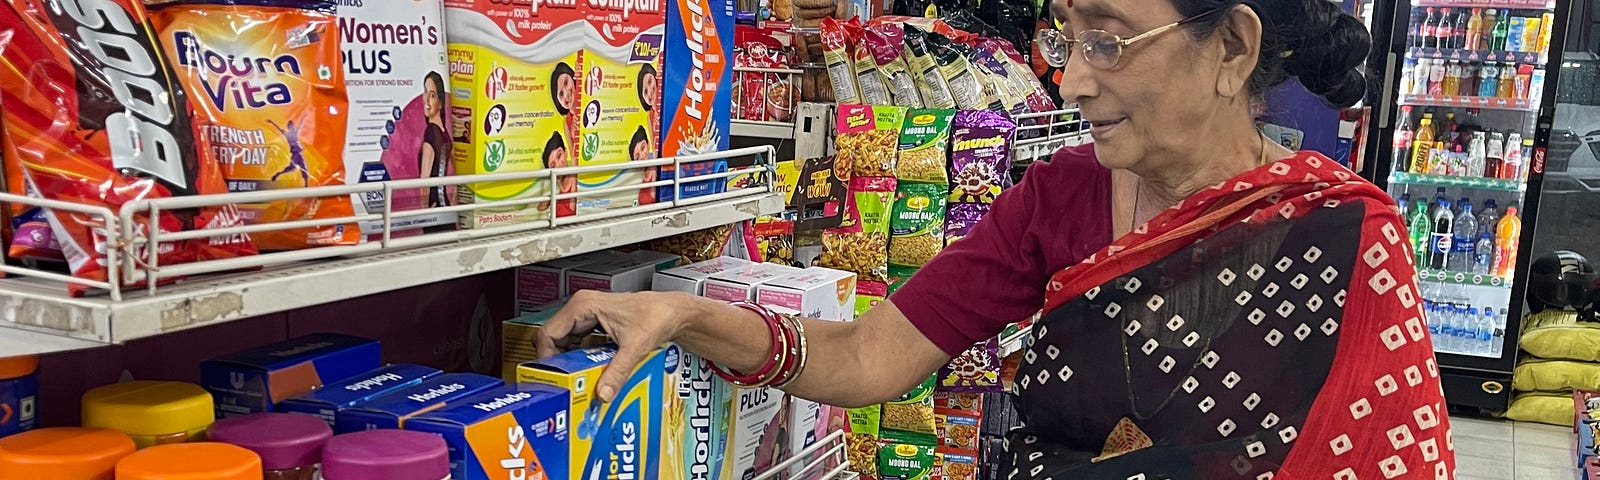 A woman in a tie-and-dye flowing garment is shopping in the Horlicks (processed malt-based powder) aisle at a grocery store. The woman is wearing bangles. There is a strip of masala packages hanging behind her.